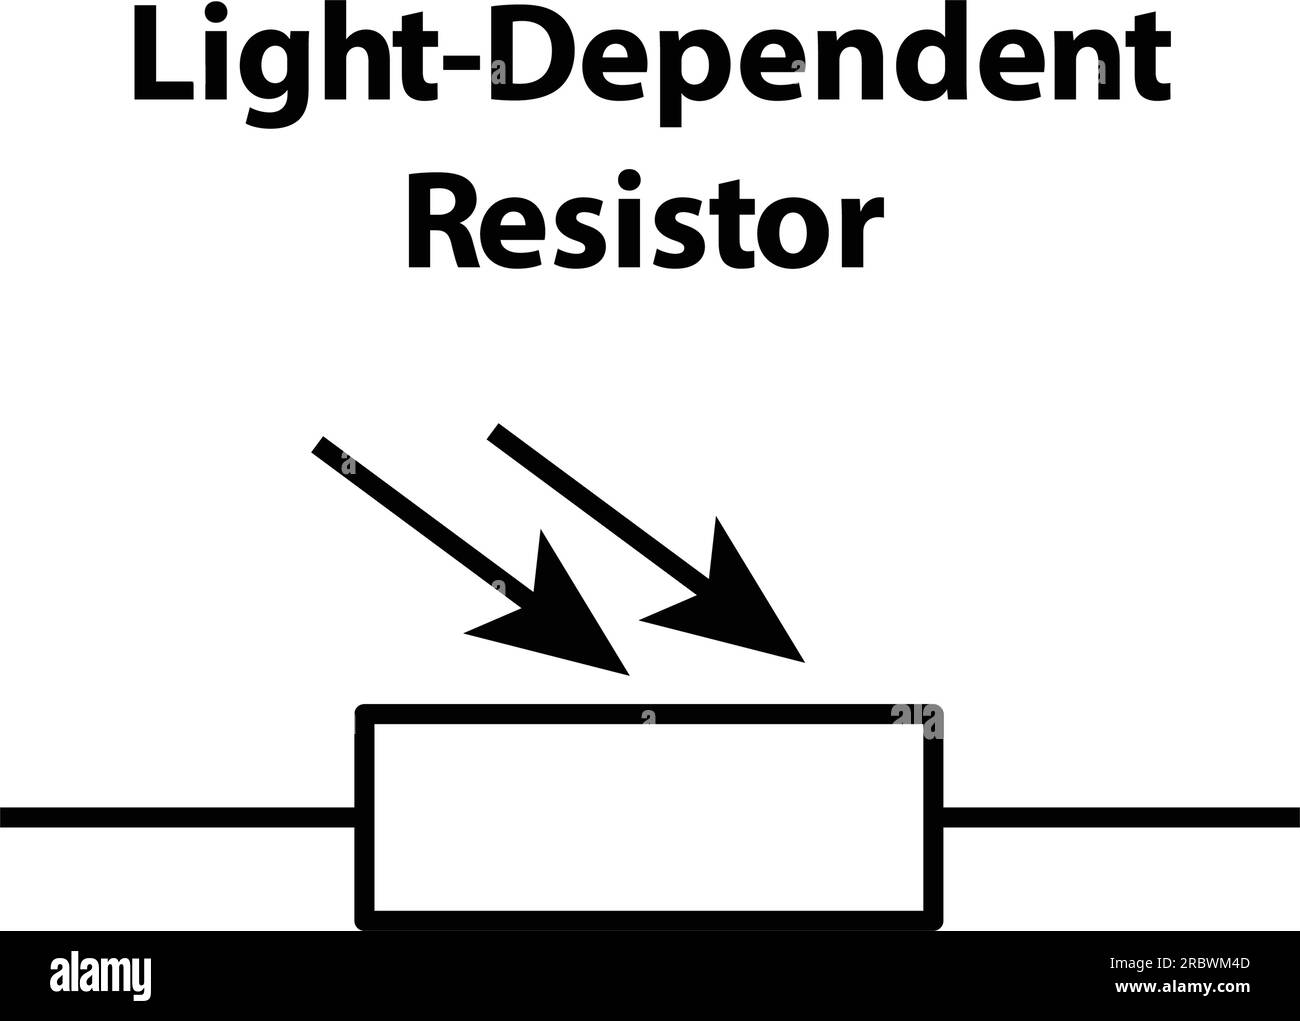 Light-Dependent Resistor. electronic symbol of Illustration of basic circuit symbols. Electrical symbols, study content of physics students. Stock Vector